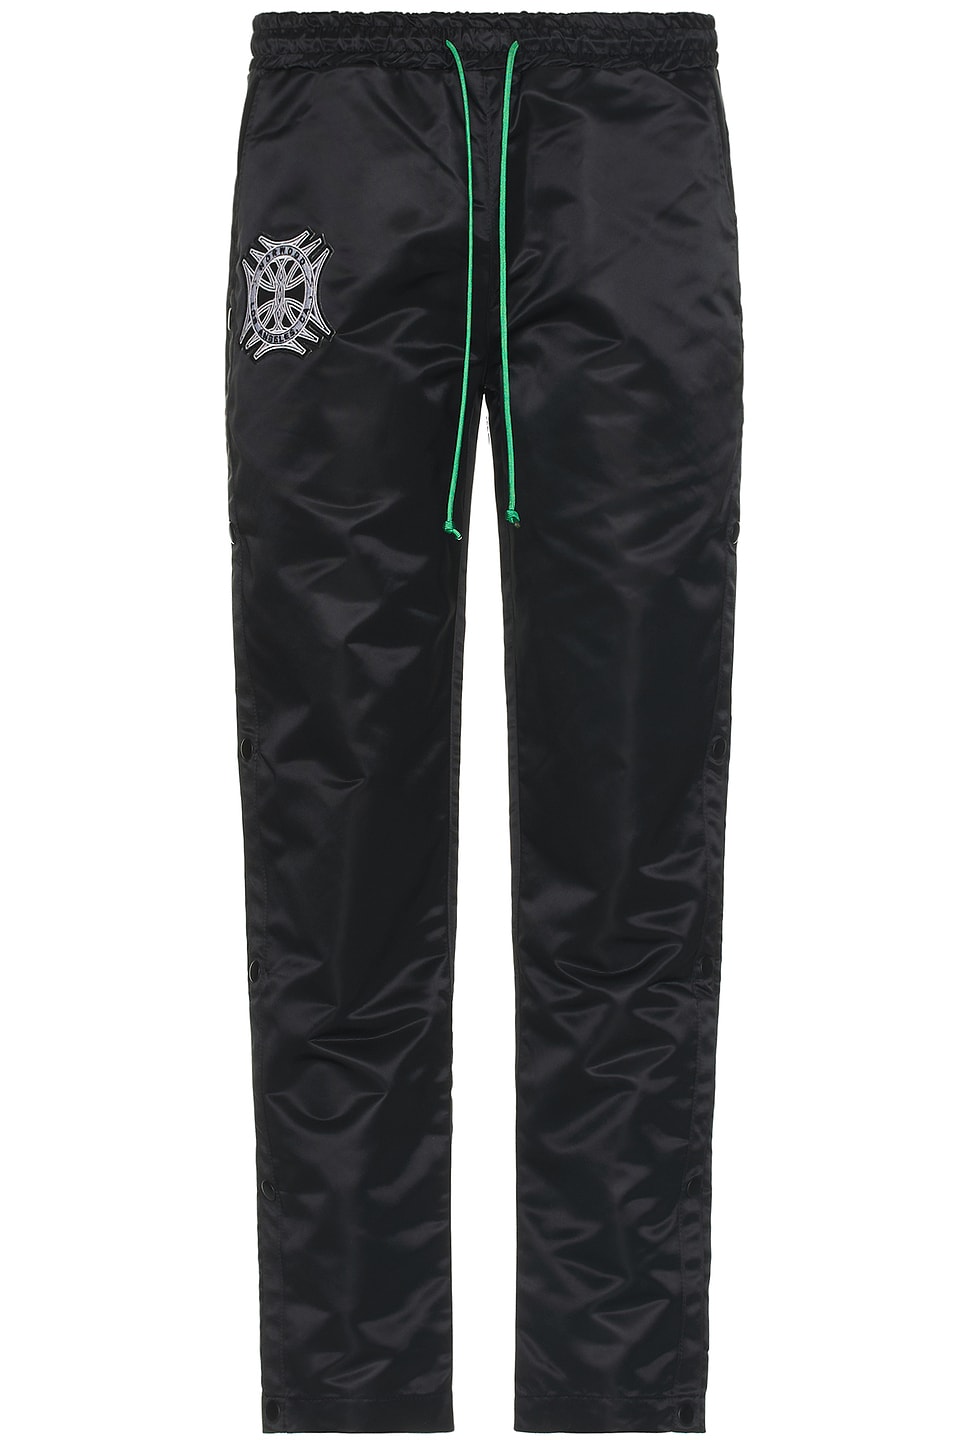 Nor Shield Snap Pant in Black